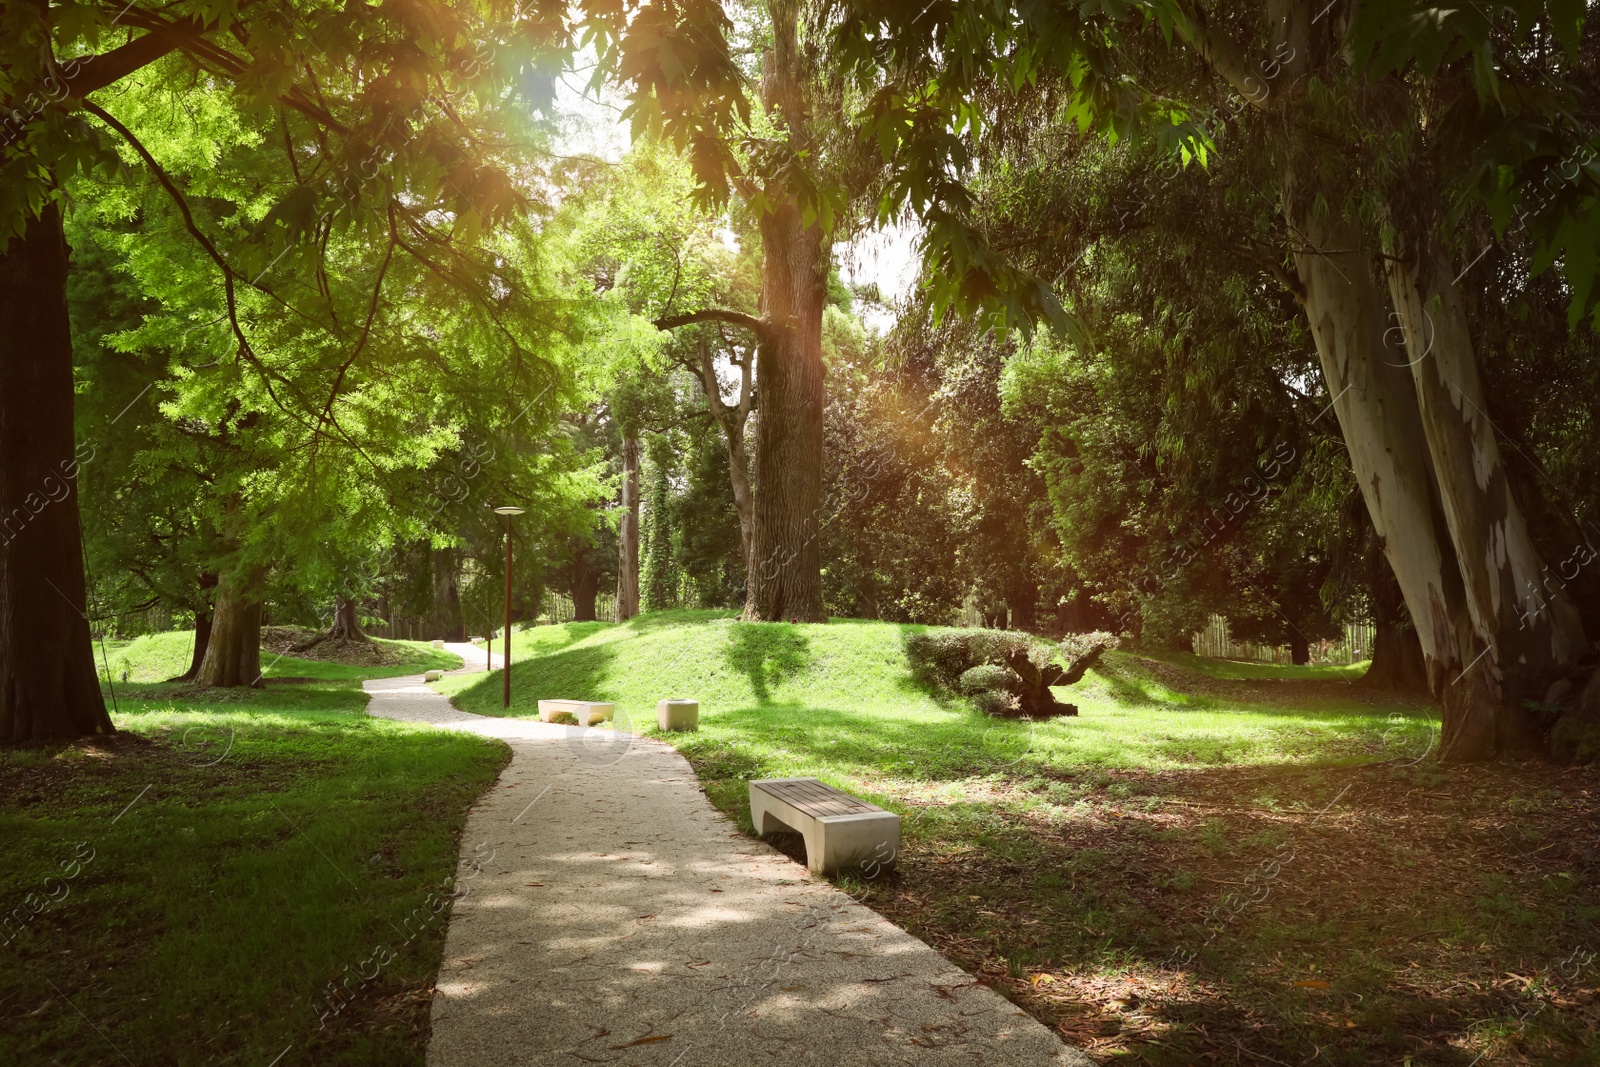 Photo of Picturesque view of tranquil park with paved pathway and benches